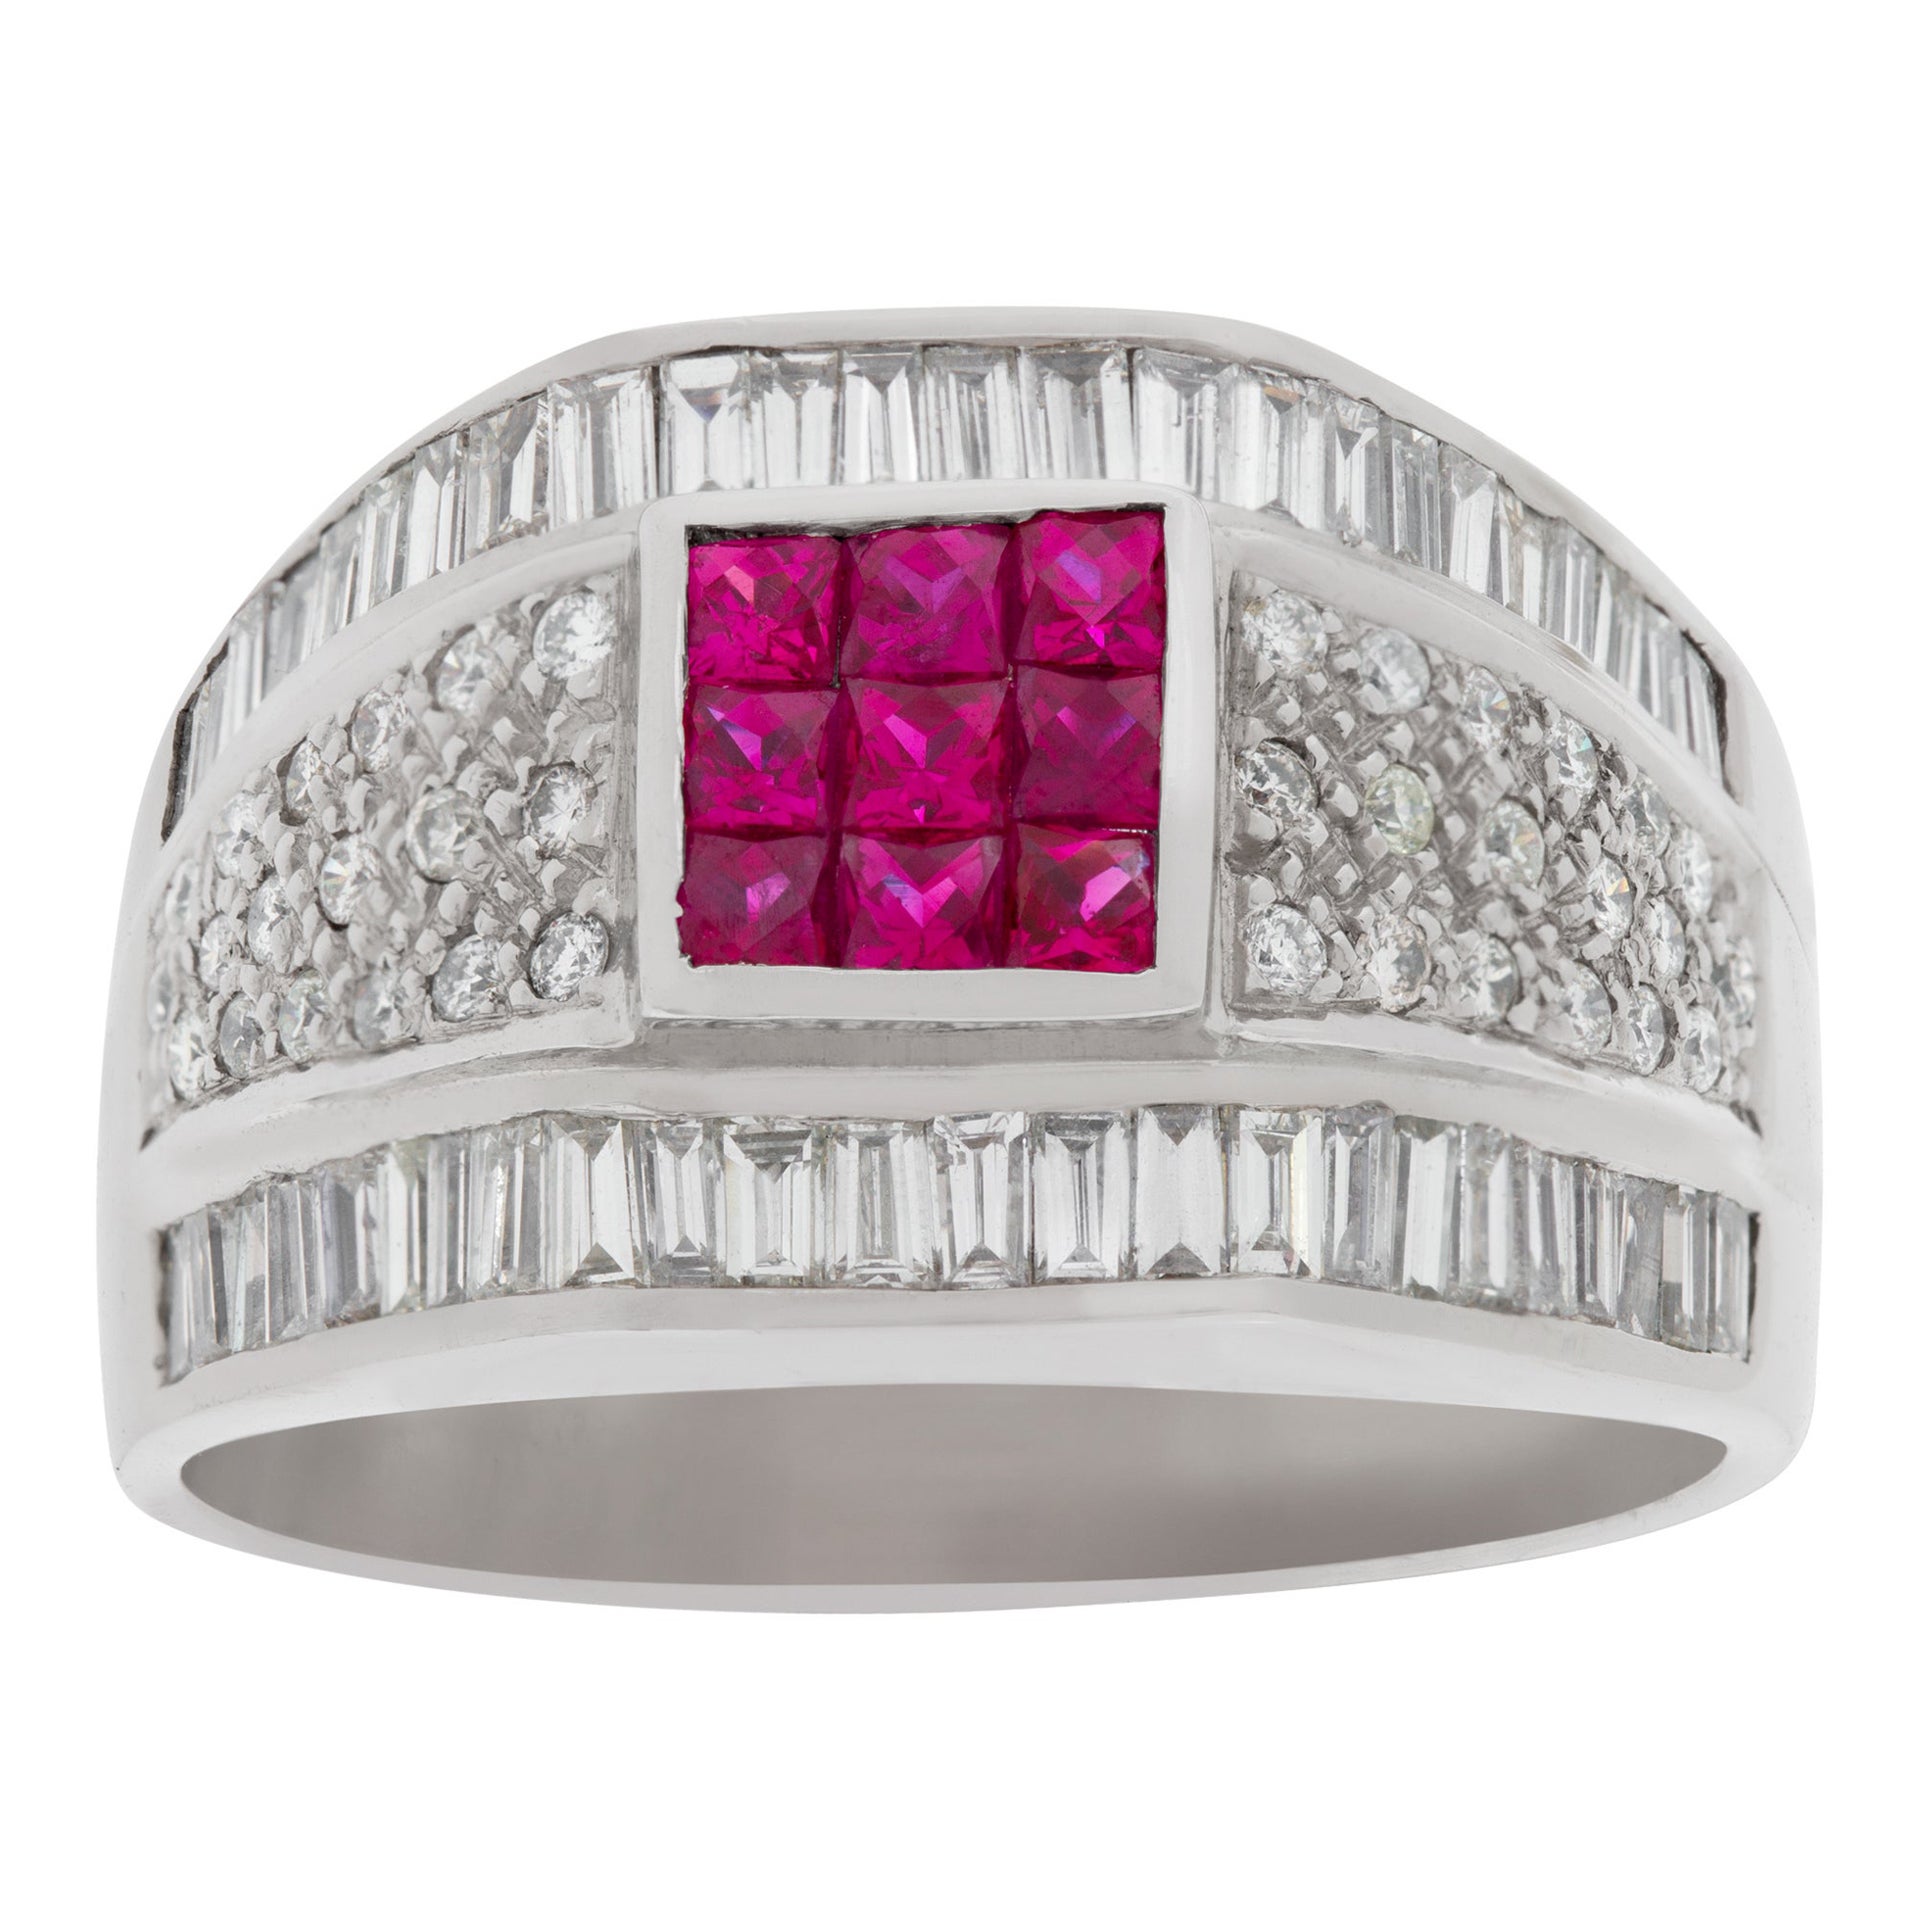 Rubies and Diamond Ring in 18k White Gold, 1.00 Carats in Diamonds